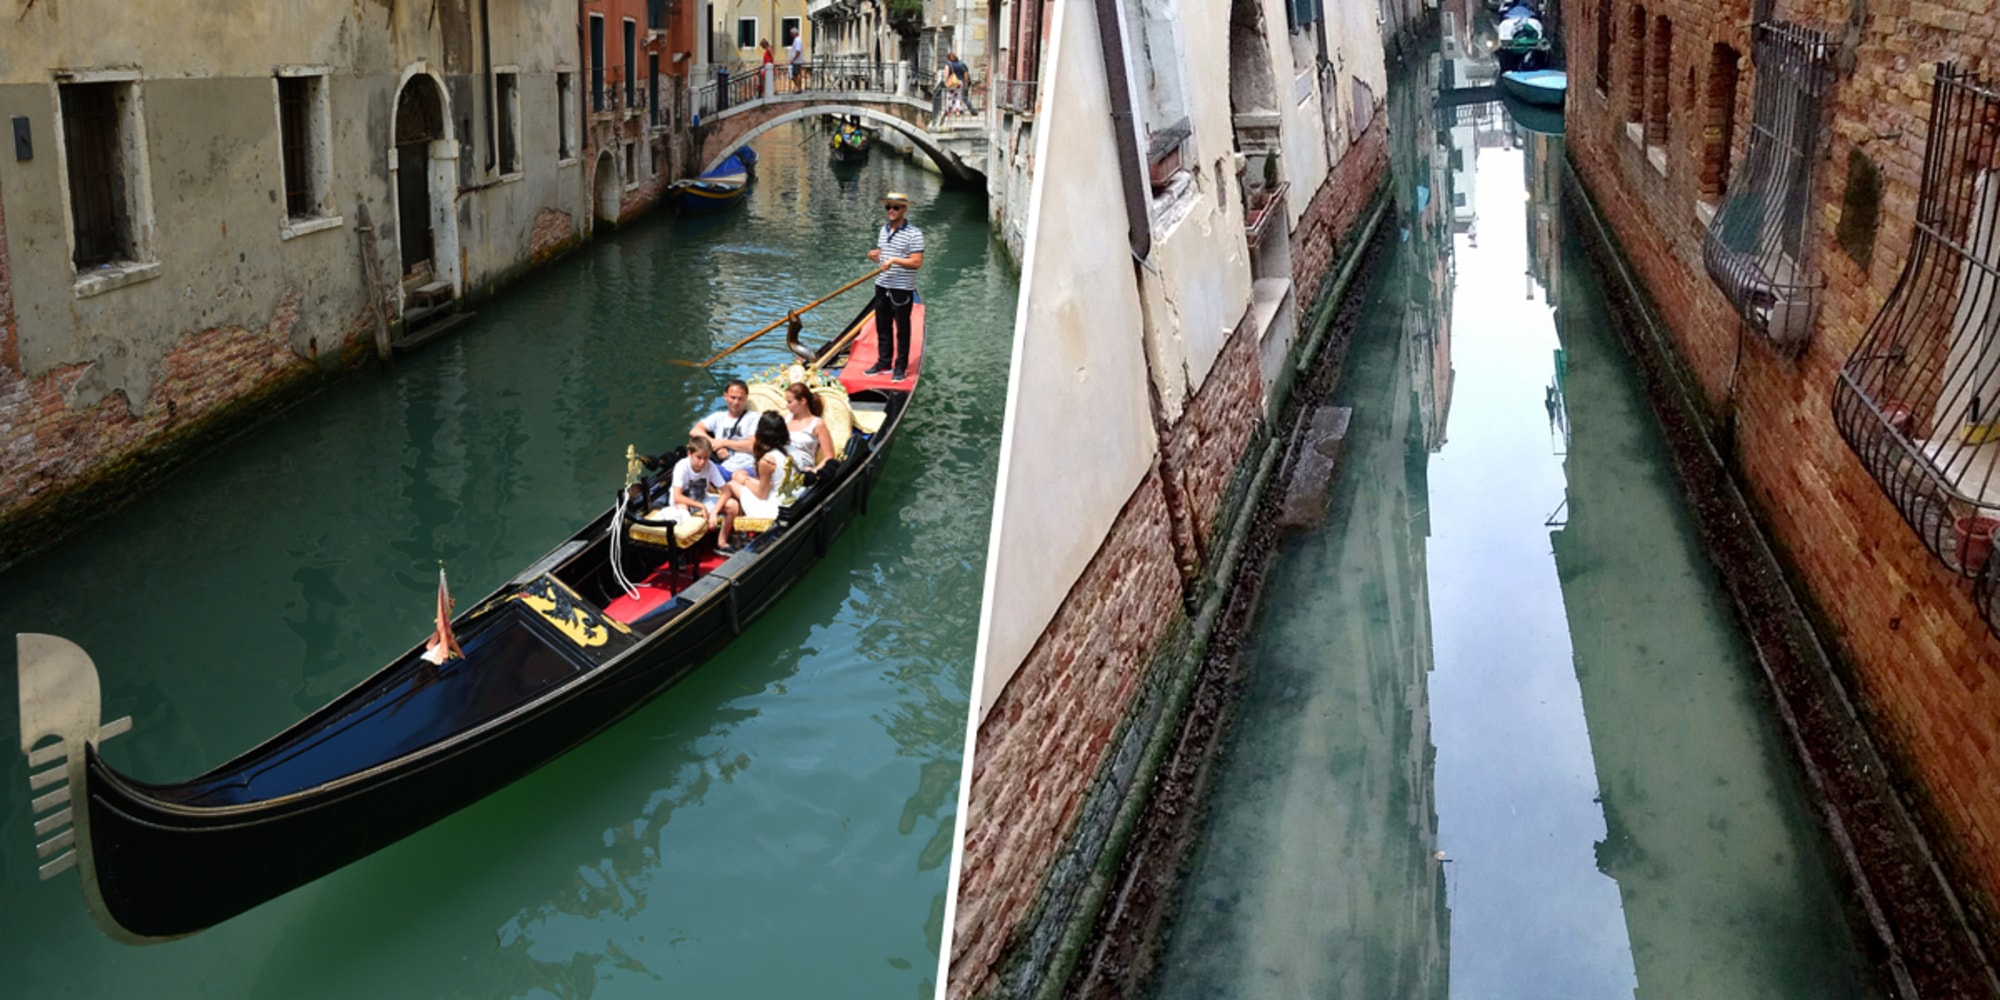 Tourists on a Venice canal in 2013. Water in Venice's canals appeared to run clearer in the absence of boat traffic in early March.